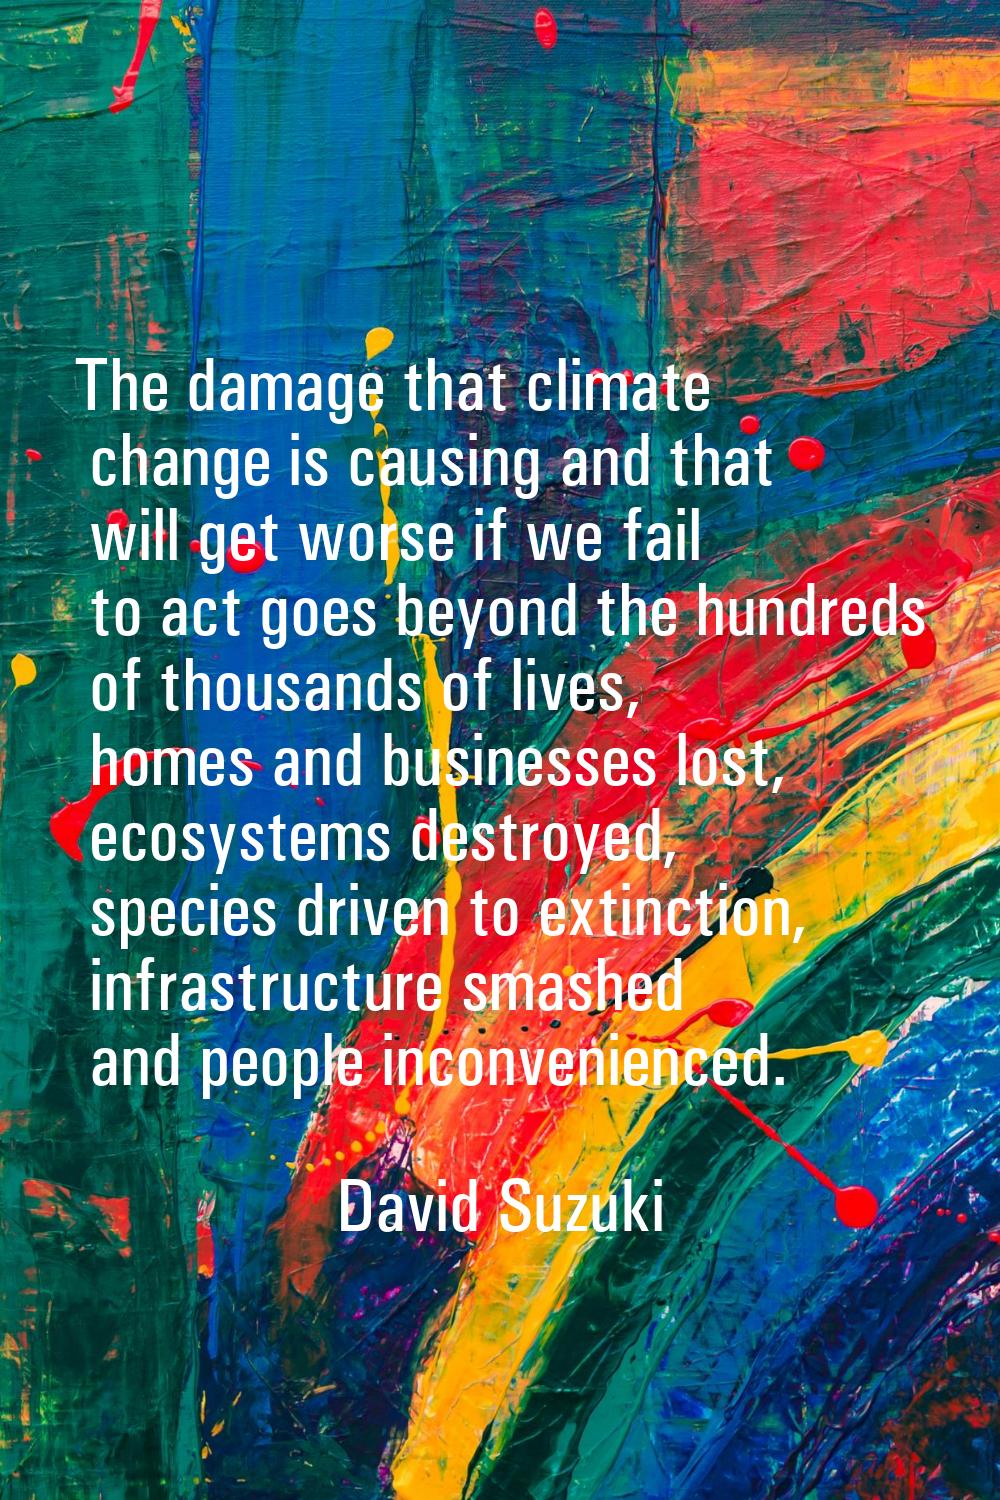 The damage that climate change is causing and that will get worse if we fail to act goes beyond the